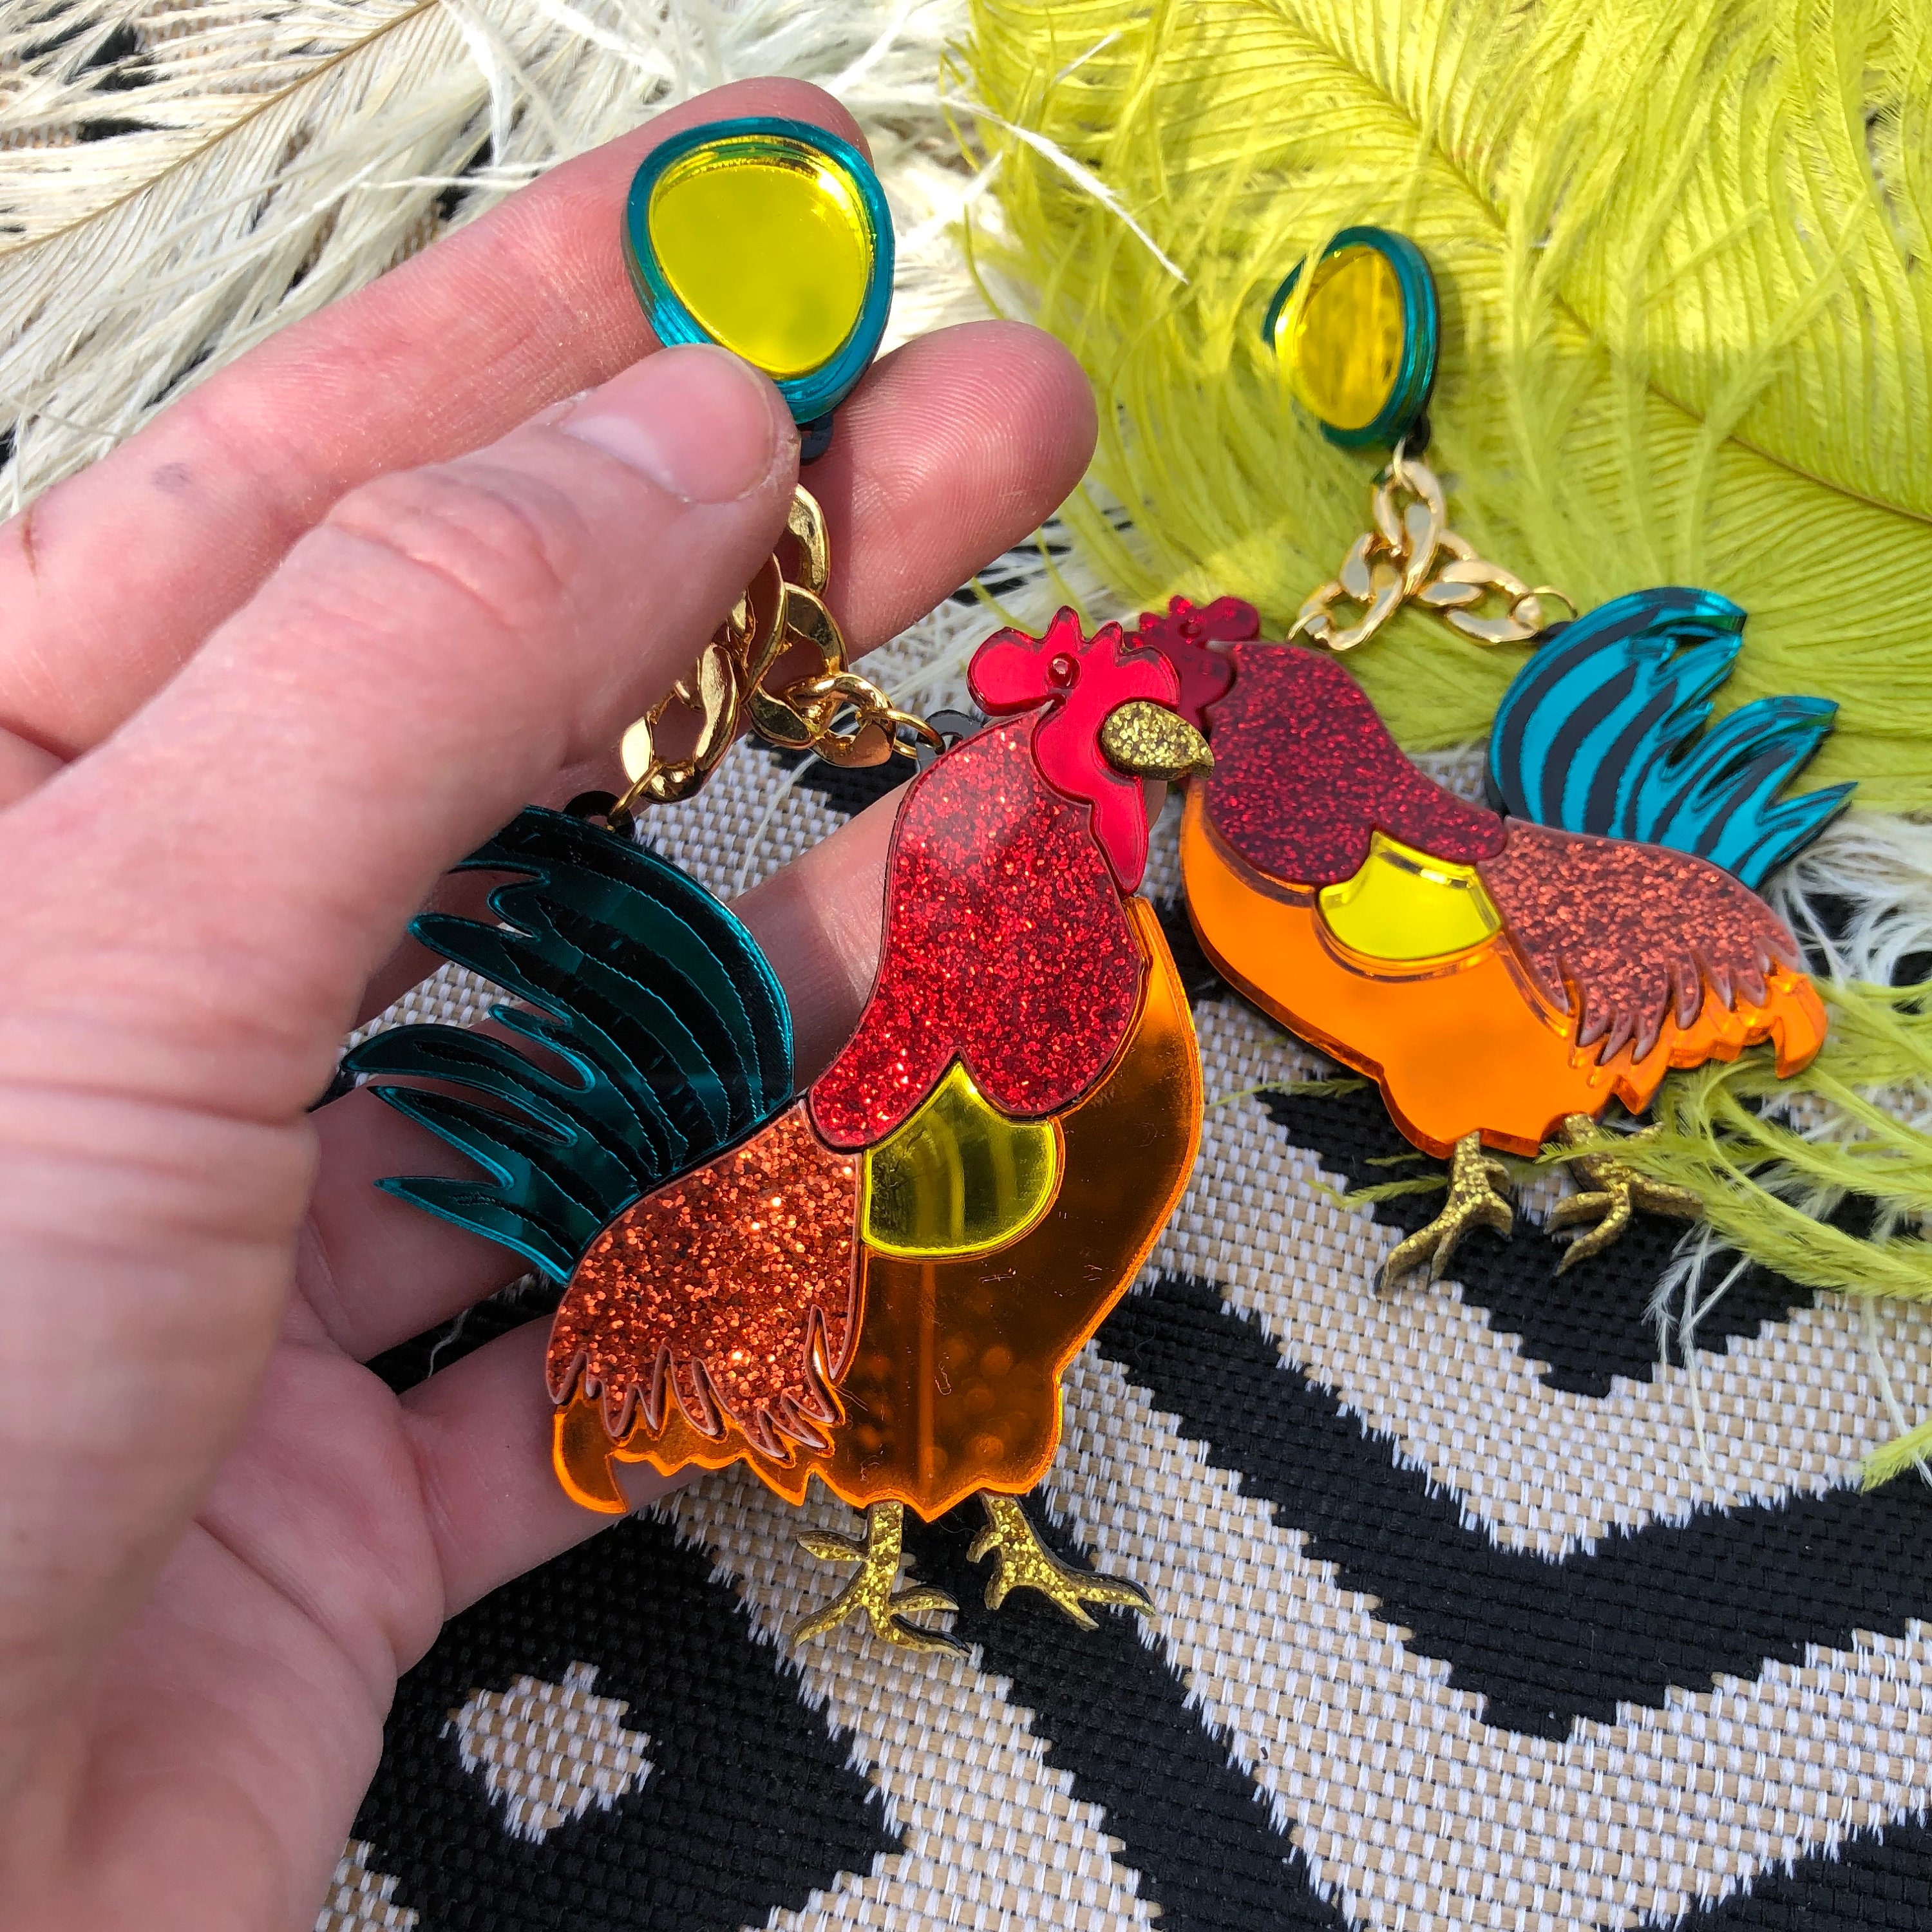 Rubber Chicken Earrings: Superfun, Realistic, Cute and Totally Unique Plastic Earrings